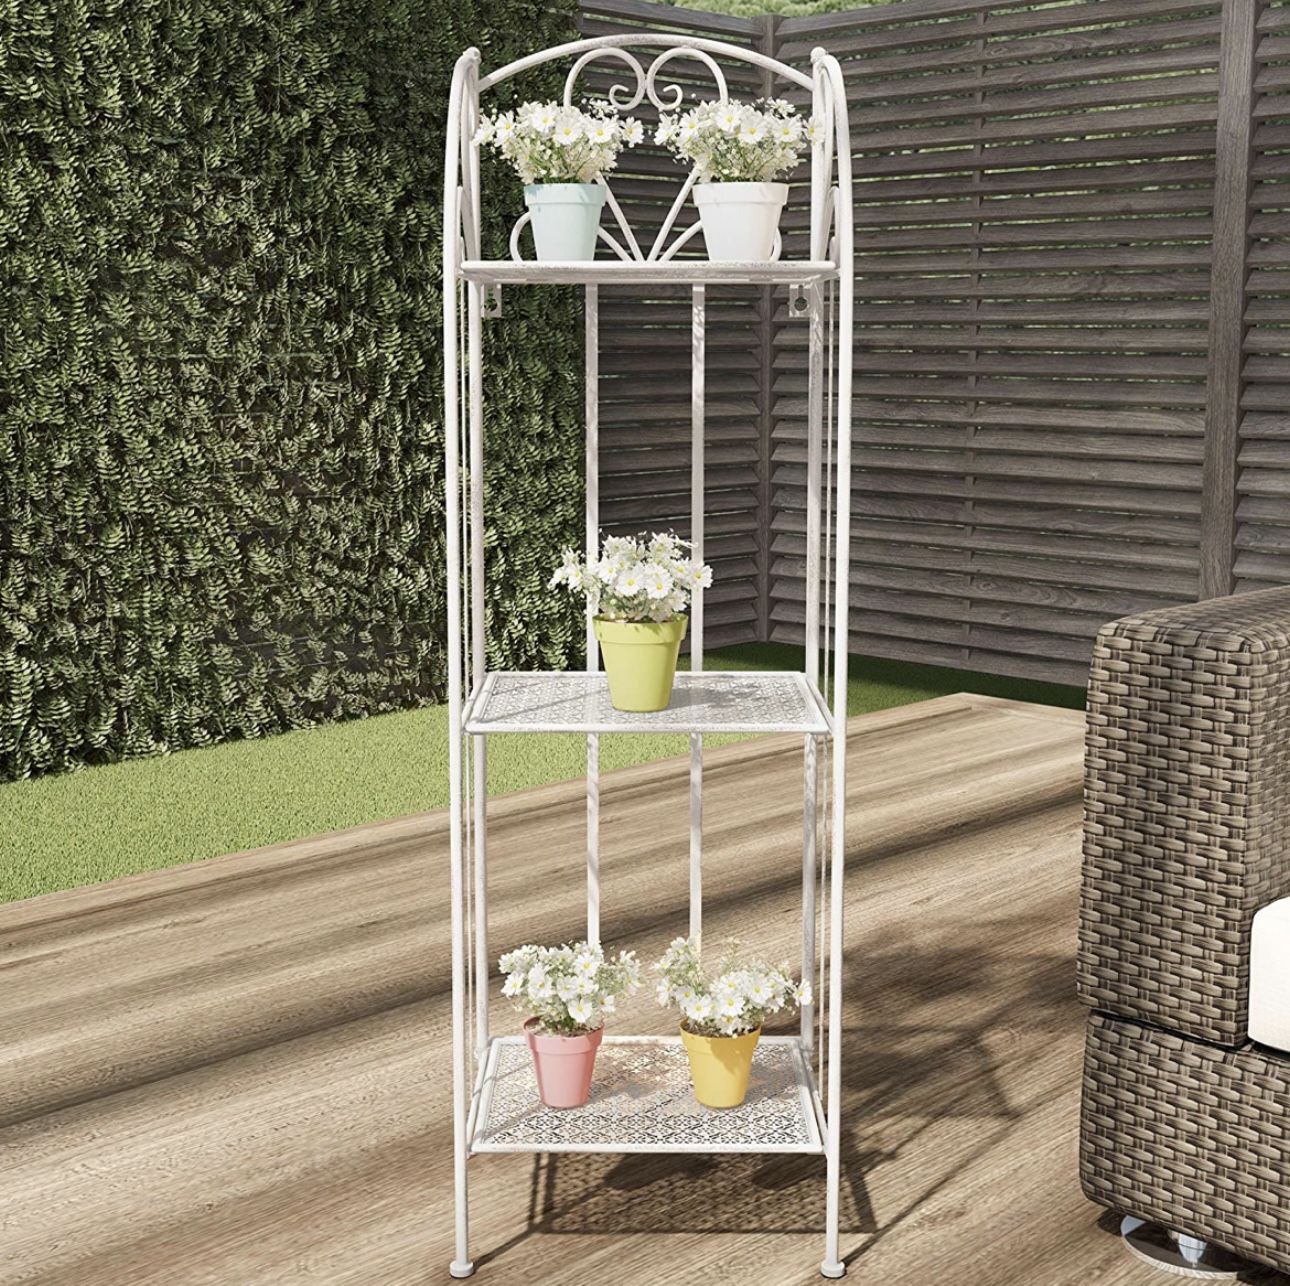 Plant Stand - 3-Tier Vertical Shelf Indoor or Outdoor Folding Wrought Iron Home Garden Display with Laser Cut Shelves (Antique White)